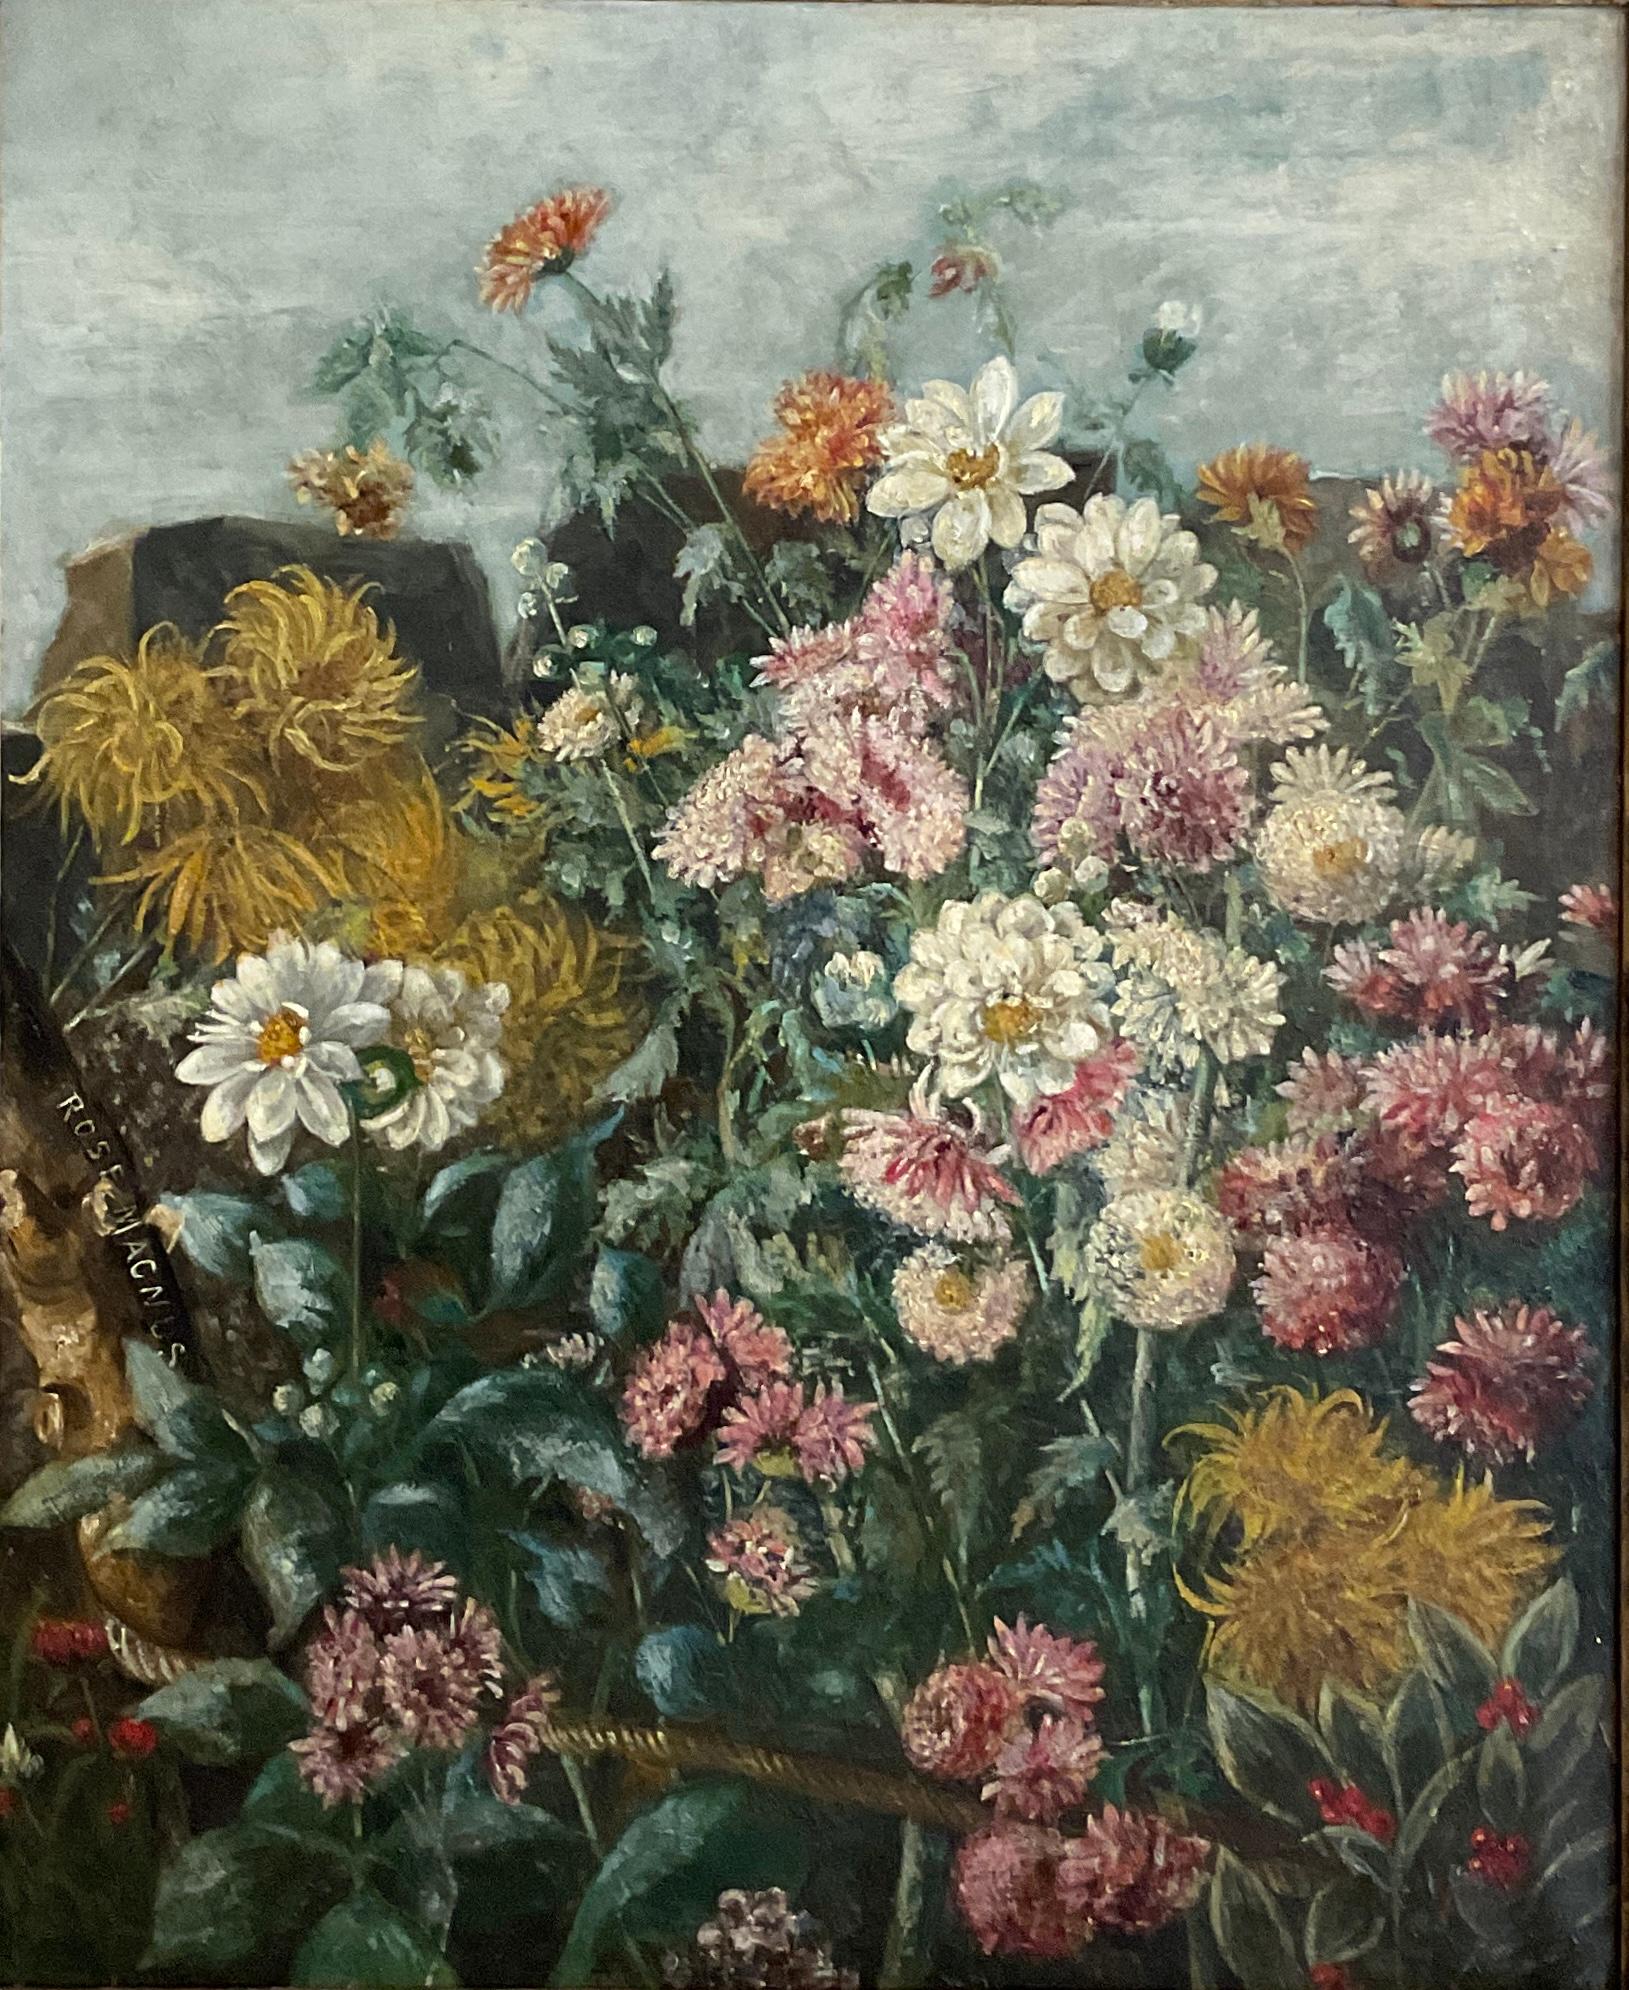 Original painting by listed British artist, Rose Magnus (1859-1900). Her artwork art on display in museums in Sheffield.
Stunning traditional work in this lovely bouquet of flowers. Signed.

A fine gilt wood period frame with one slight imperfection